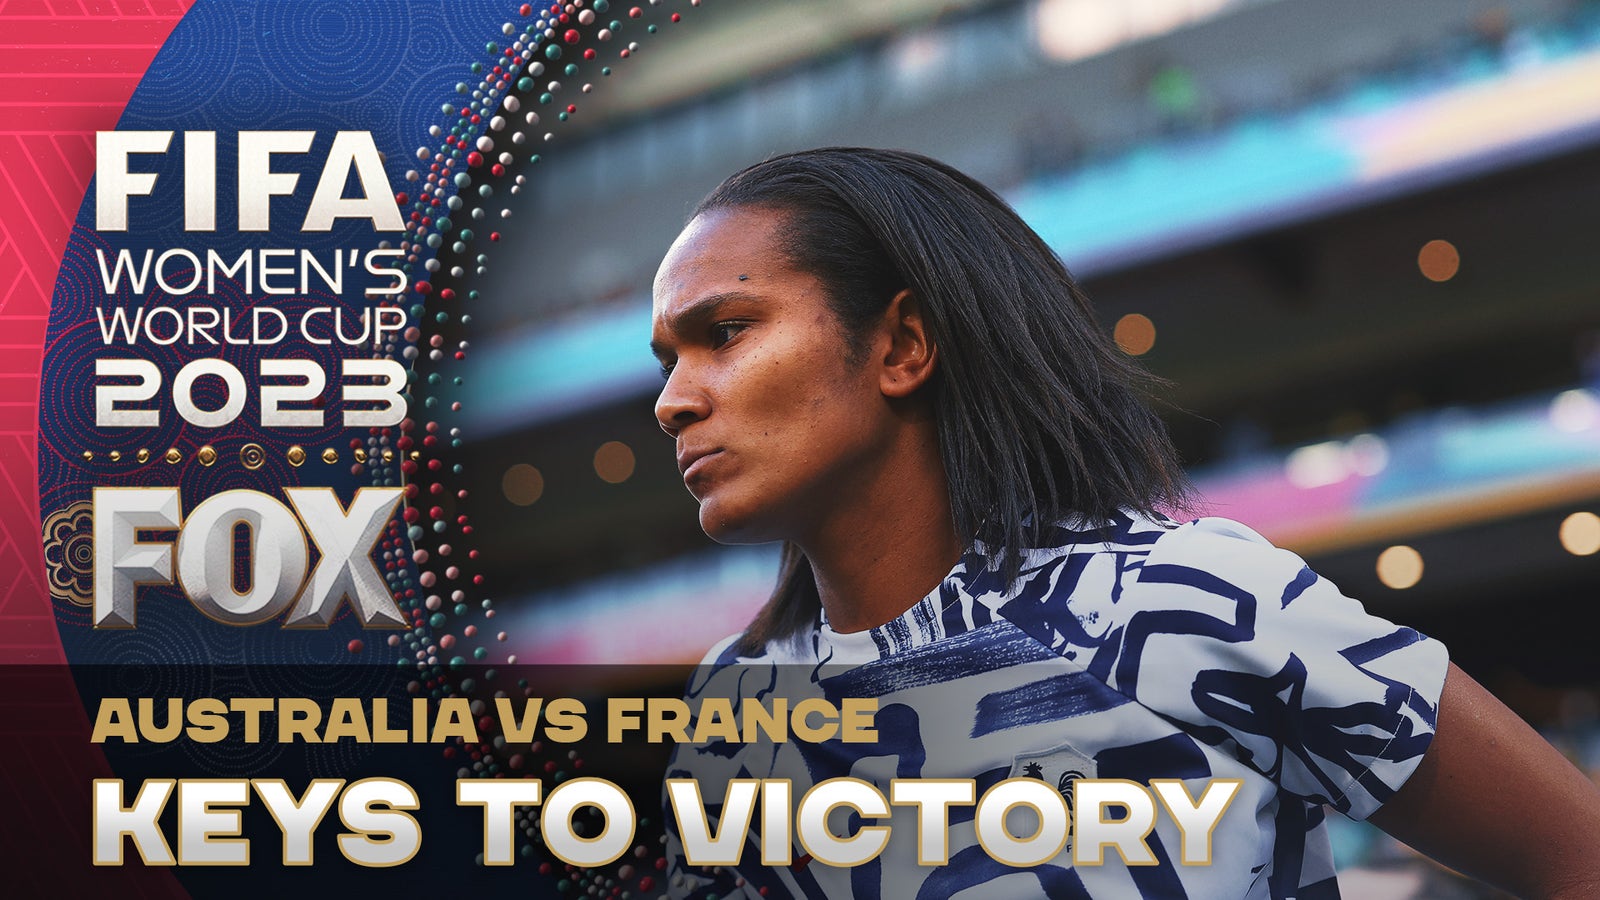 Key to win Australia vs France |  Now the World Cup